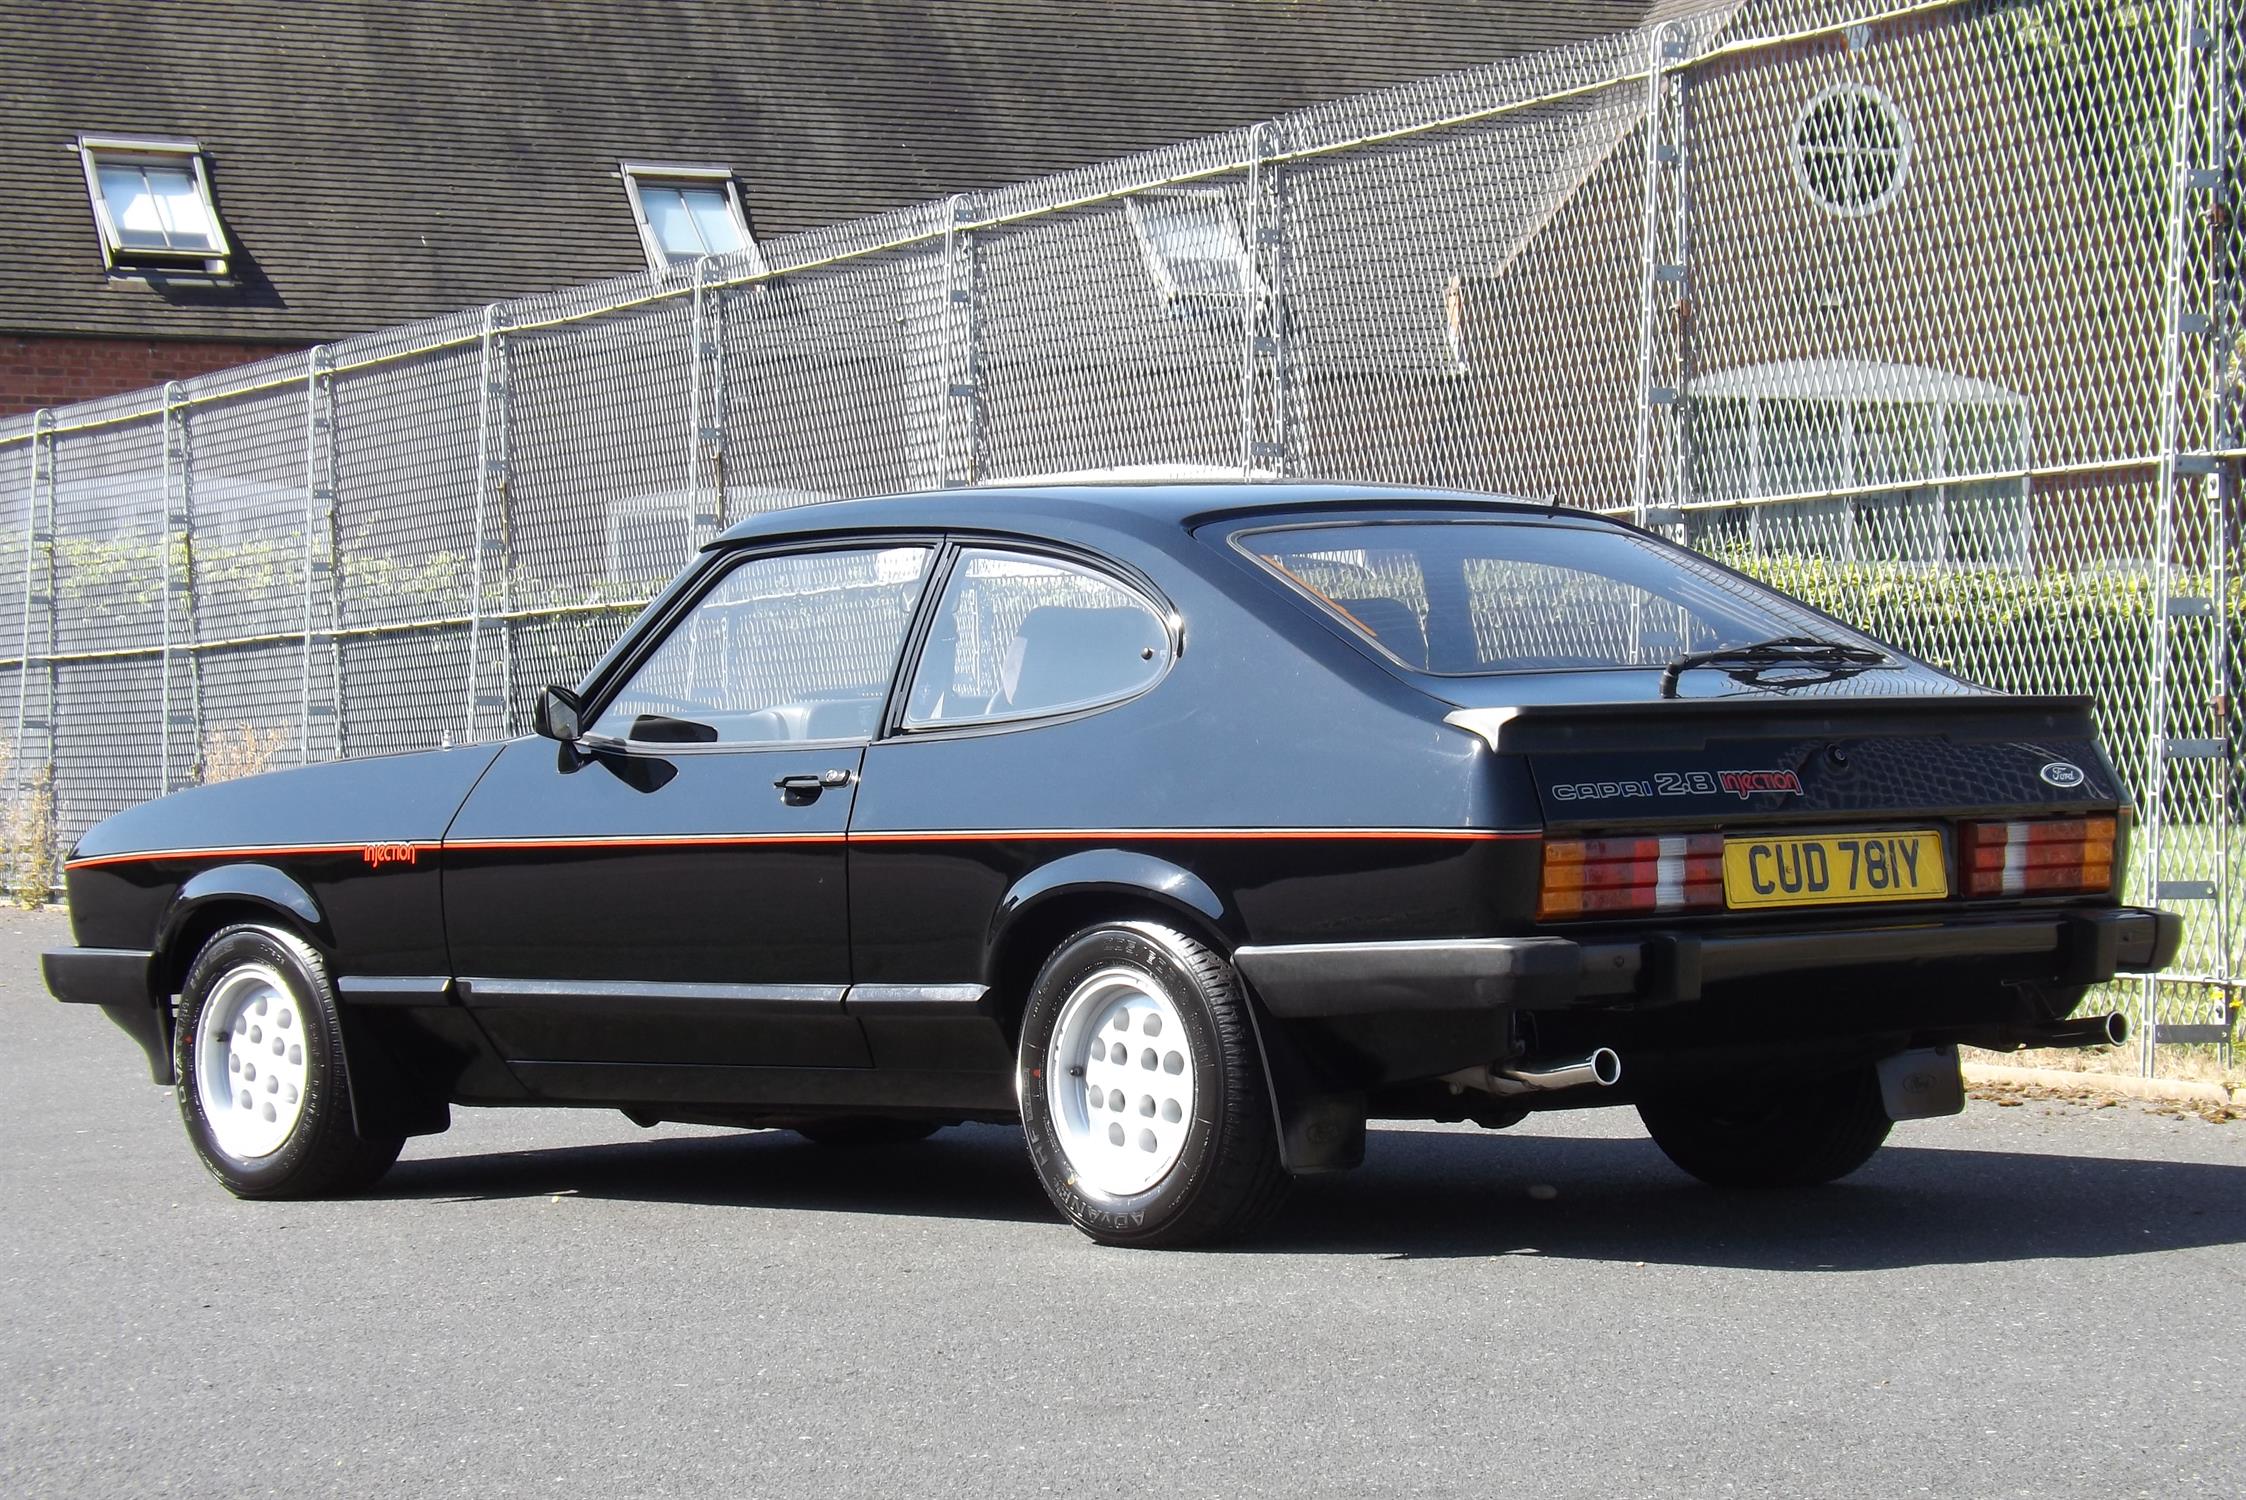 1982 Ford Capri Mk 3 2.8 Injection - Image 4 of 10